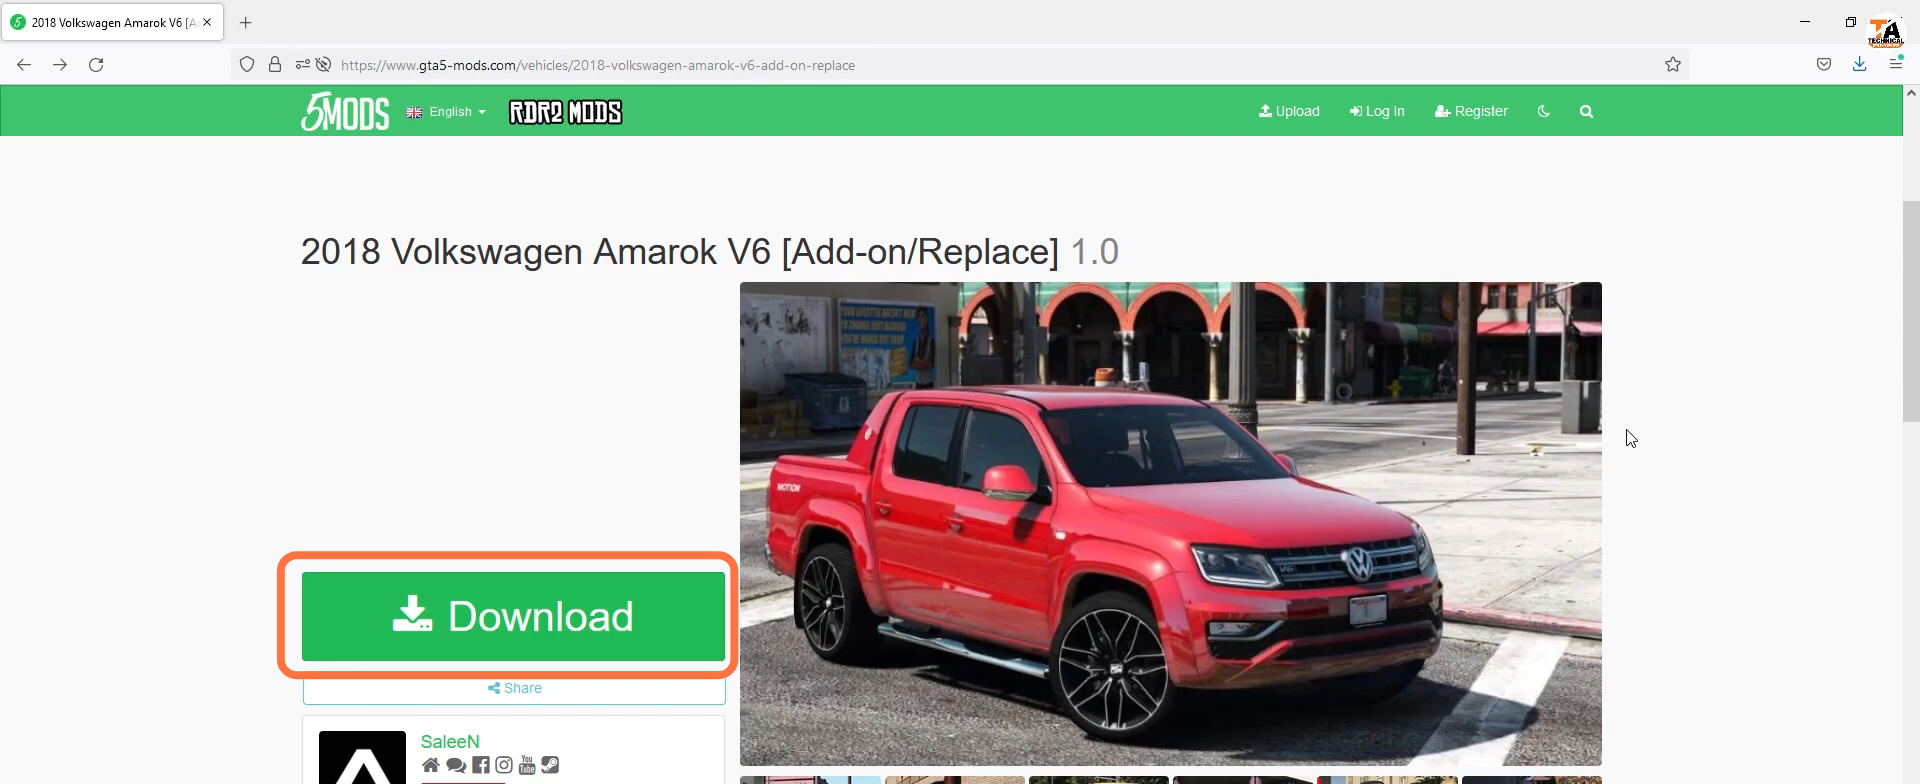 You will need to download the mod file from "https://www.gta5-mods.com/vehicles/20...". Open the link and click on the Download button to download it. 